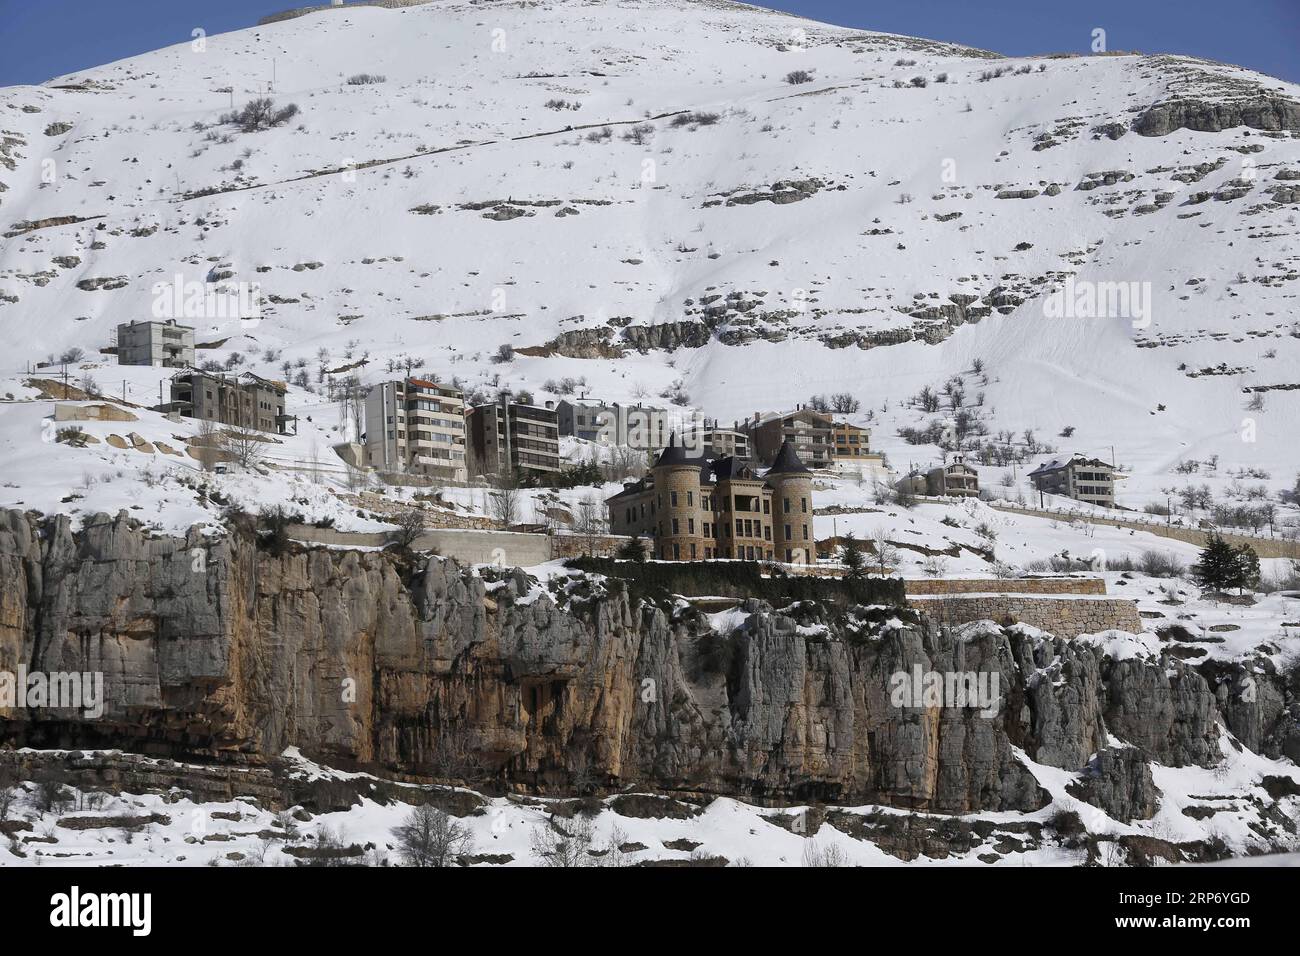 (190122) -- BEIRUT, Jan. 22, 2019 -- Photo taken on Jan. 22, 2019 shows the snow-covered Faraya, a resort town in Lebanon. The storms hit Lebanon in the past month, bringing snow to several towns and areas lying 700 meters or more above sea level. ) LEBANON-FARAYA-SNOW BilalxJawich PUBLICATIONxNOTxINxCHN Stock Photo